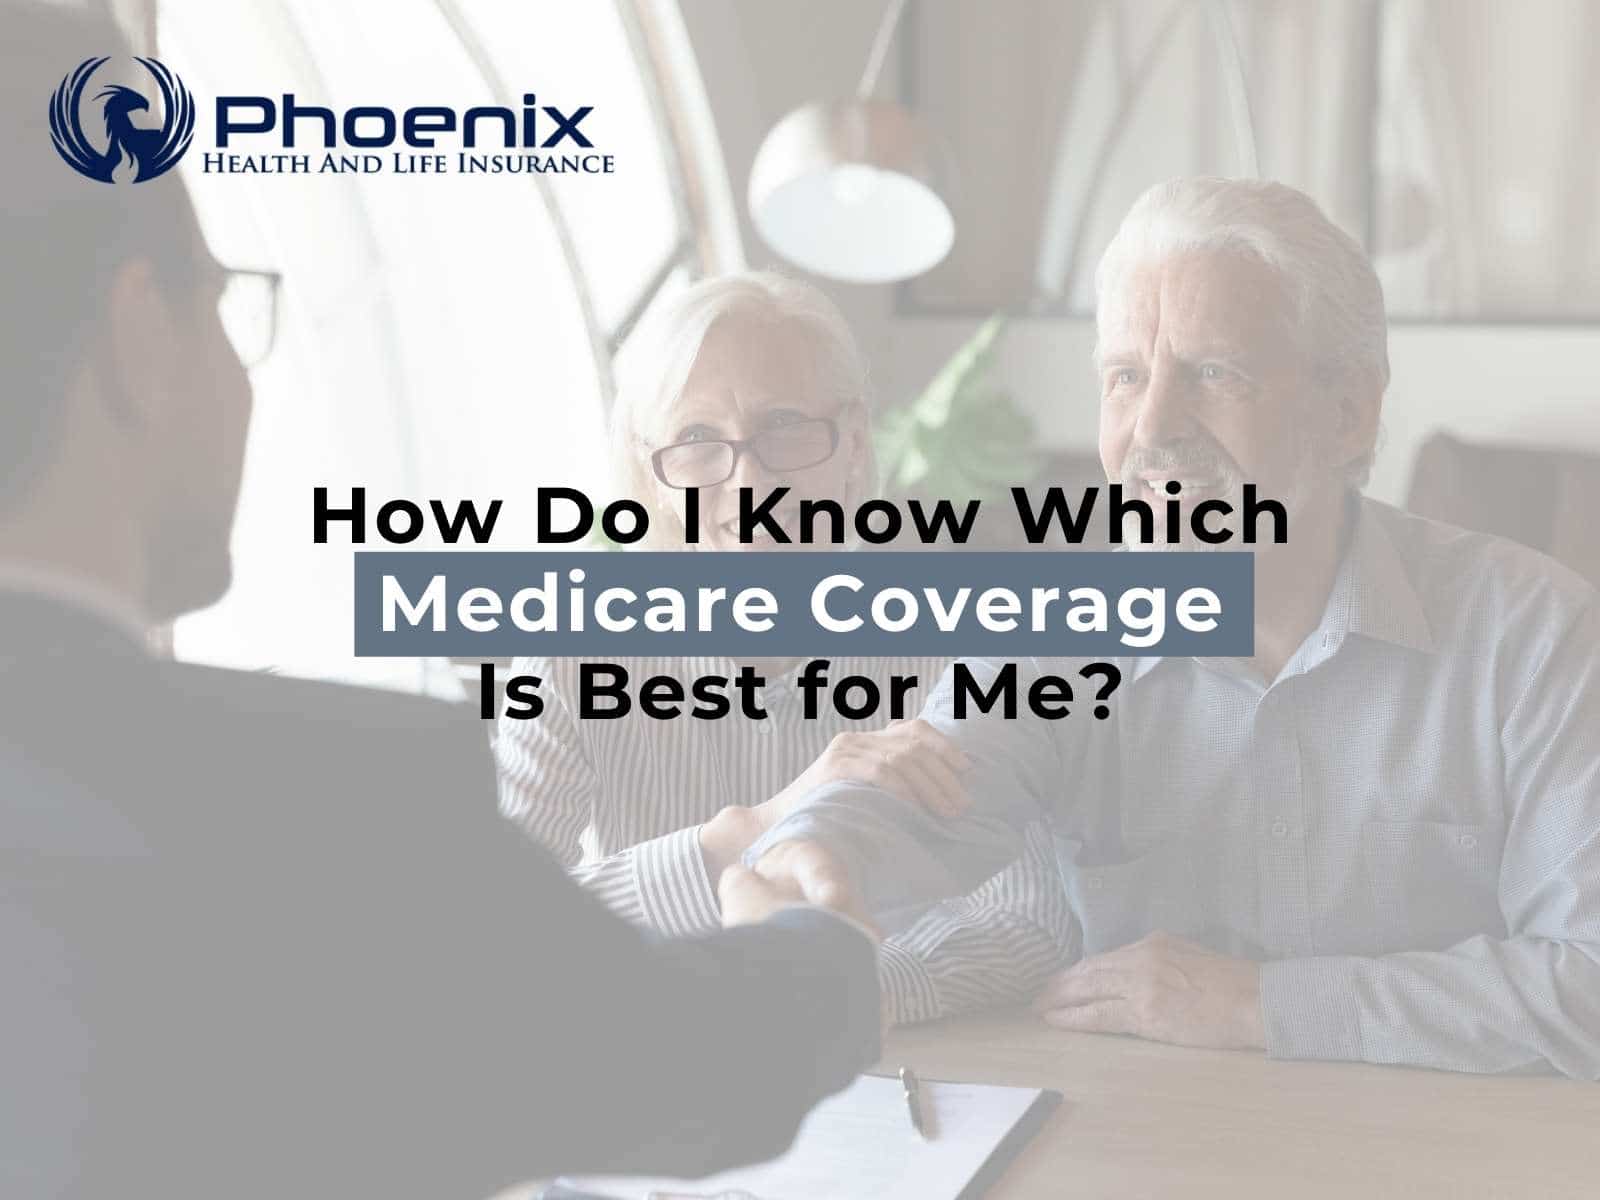 How Do I Know Which Medicare Coverage Is Best for Me?